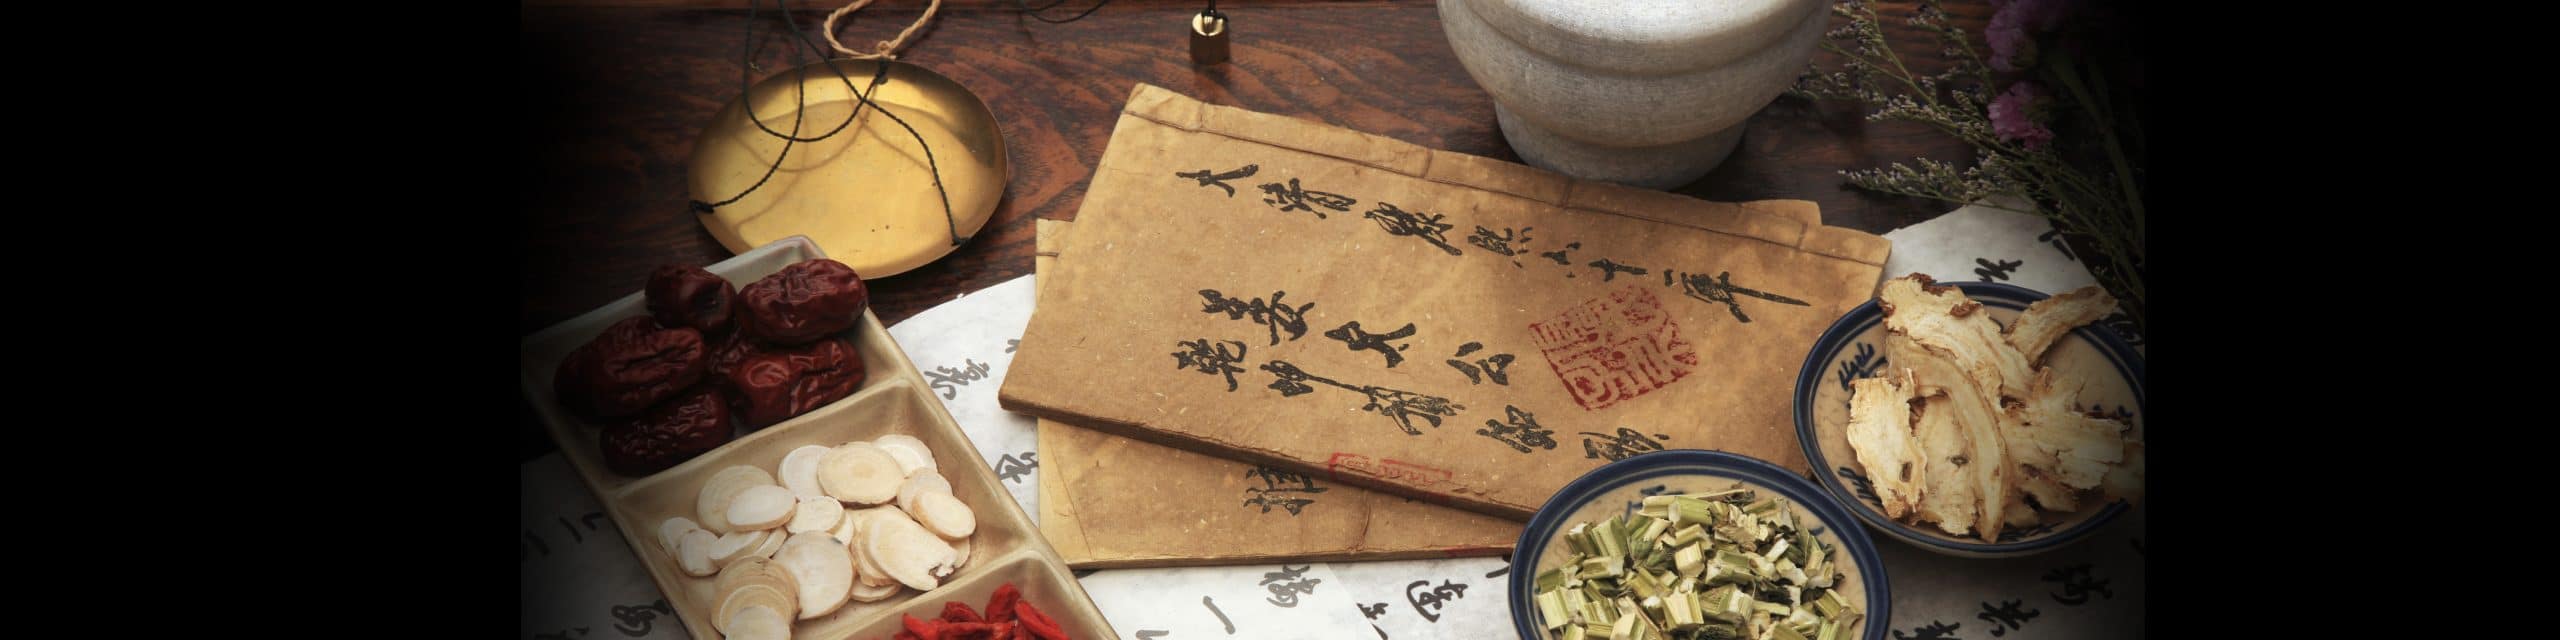 Virtual Classes about TCM and Chinese Herbology - Certified Herbalist Training courses online